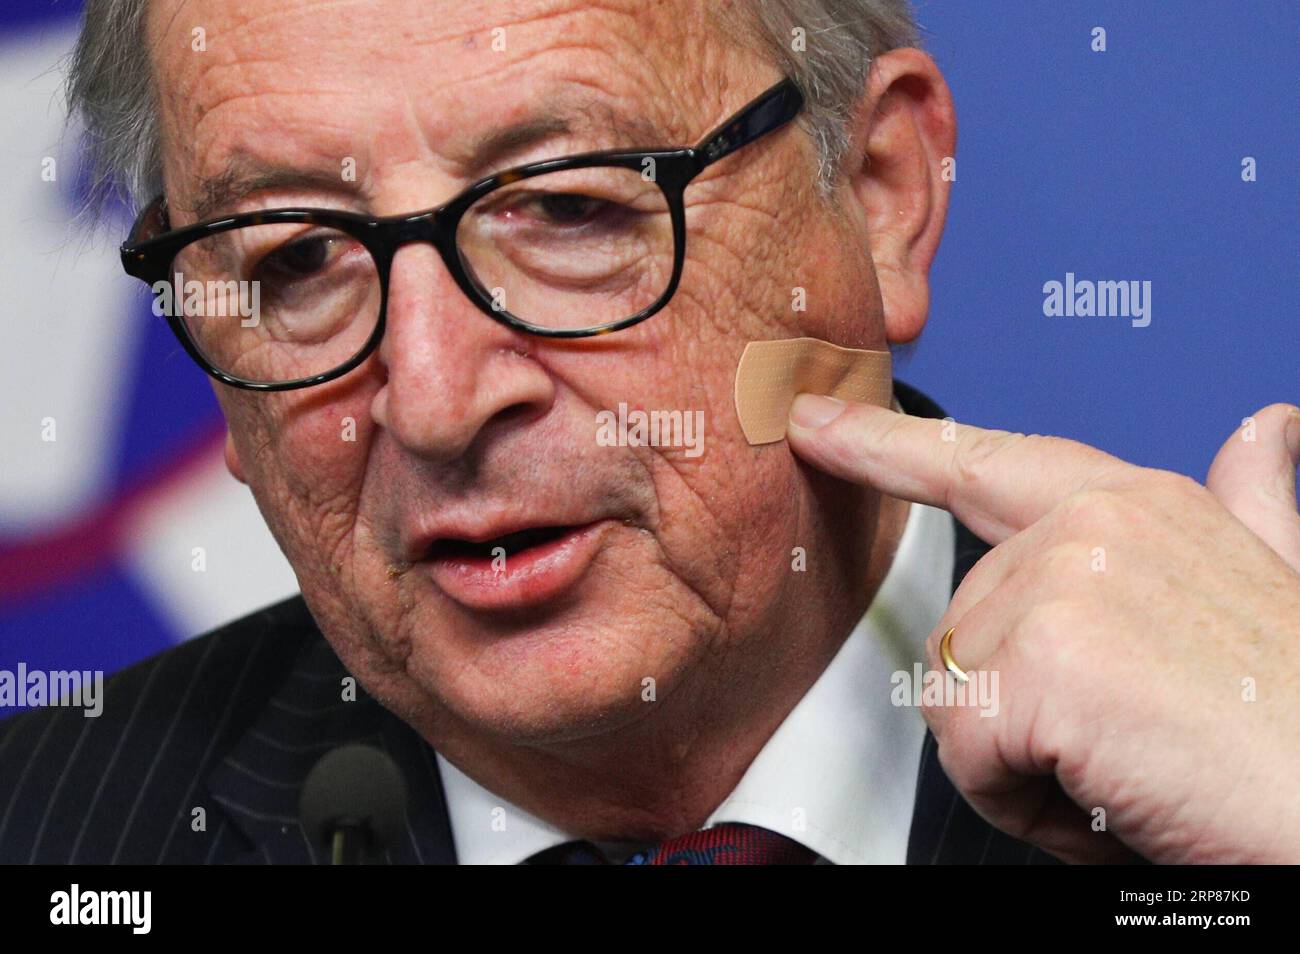 (190220) -- BRUSSELS, Feb. 20, 2019 -- European Commission President Jean-Claude Juncker points to a Band-Aid on his face during a press conference at the EU headquarters in Brussels, Belgium, on Feb. 20, 2019. ) BELGIUM-BRUSSELS-EU-JUNCKER-PRESS CONFERENCE ZhengxHuansong PUBLICATIONxNOTxINxCHN Stock Photo